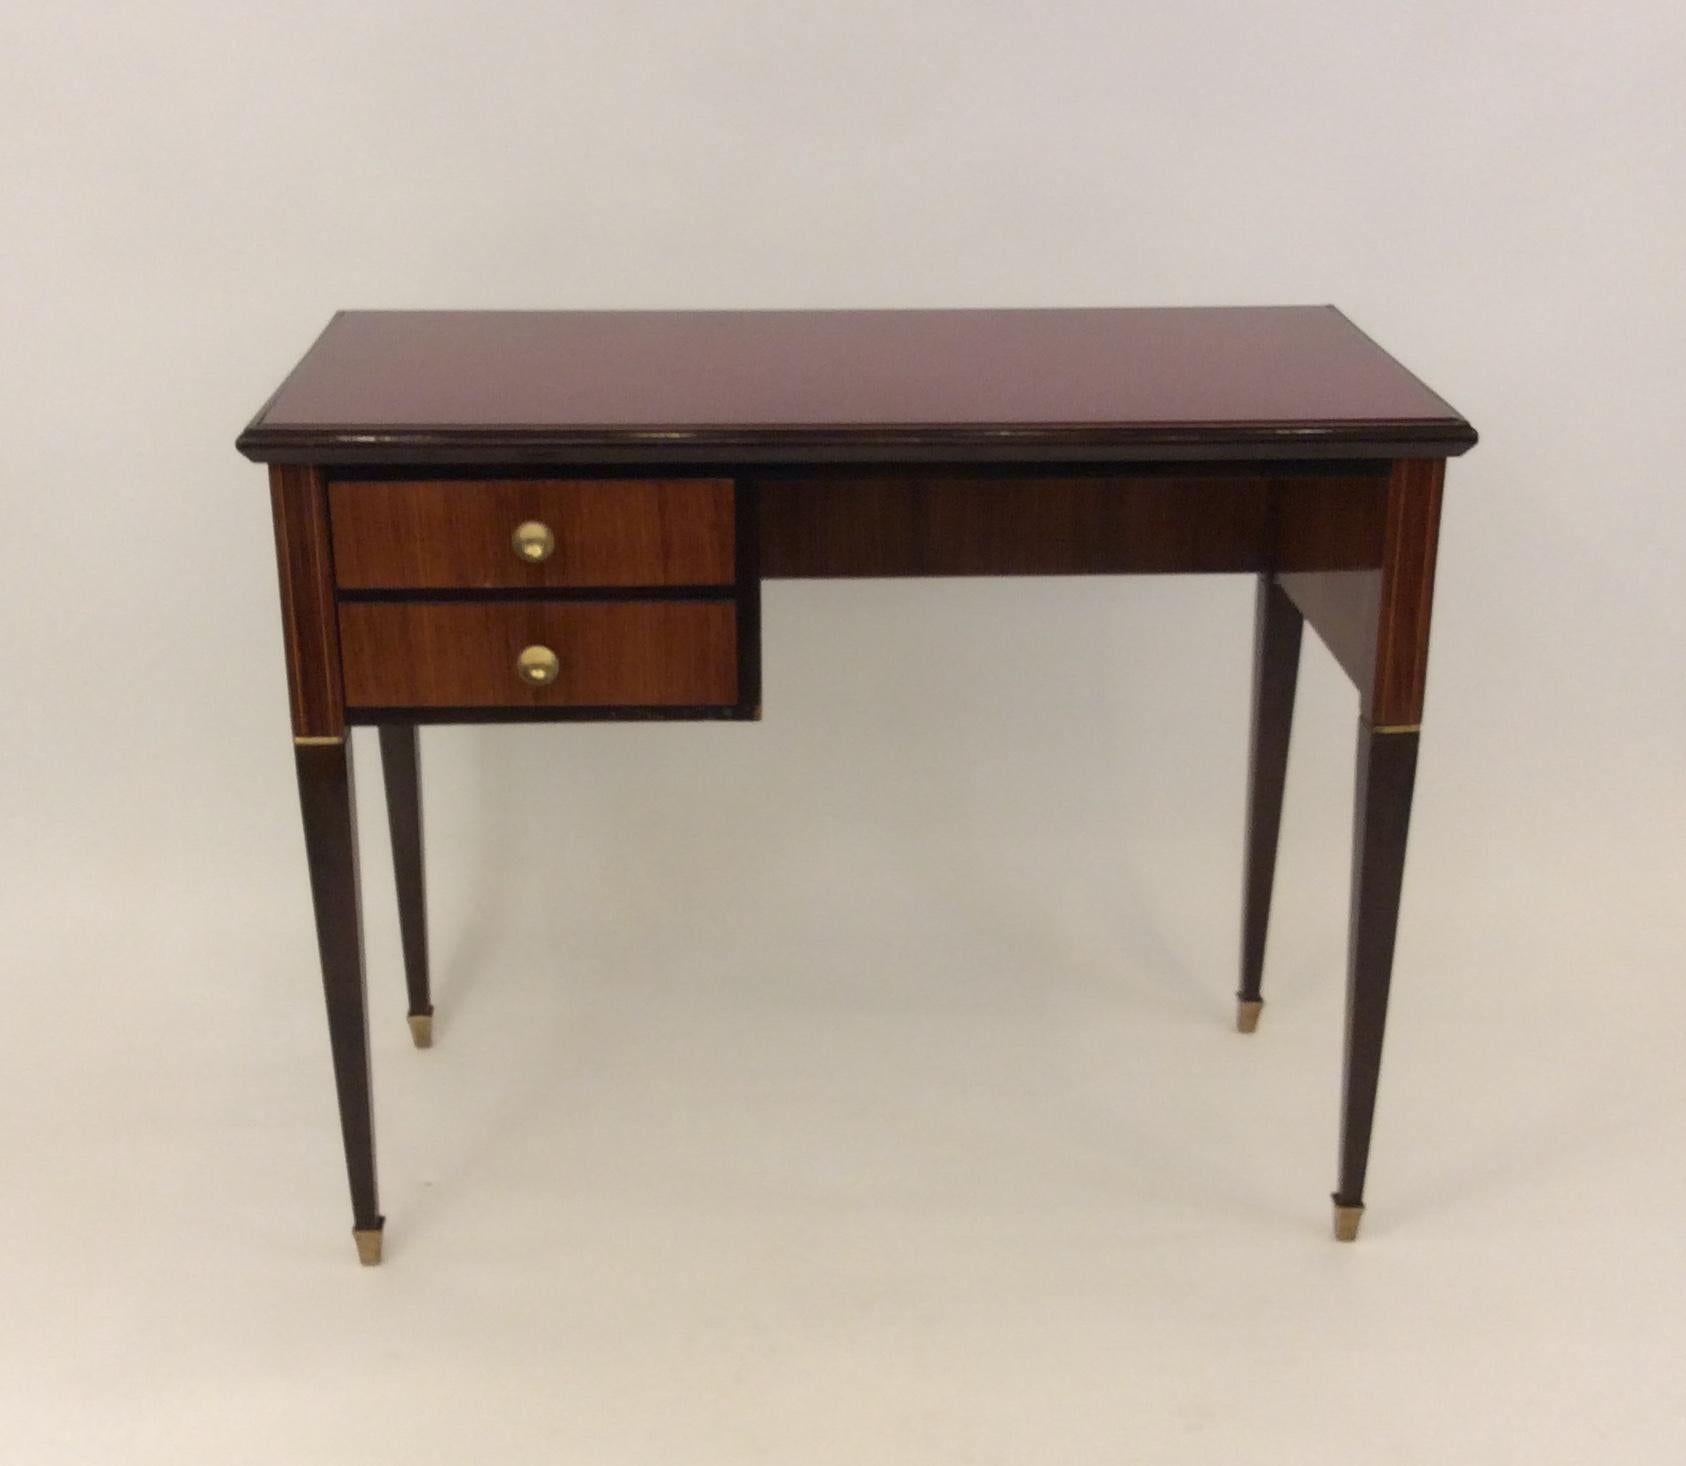 An Italian vanity table/small desk in mahogany with two drawers, brass hardware and red glass top.
In lovely vintage condition